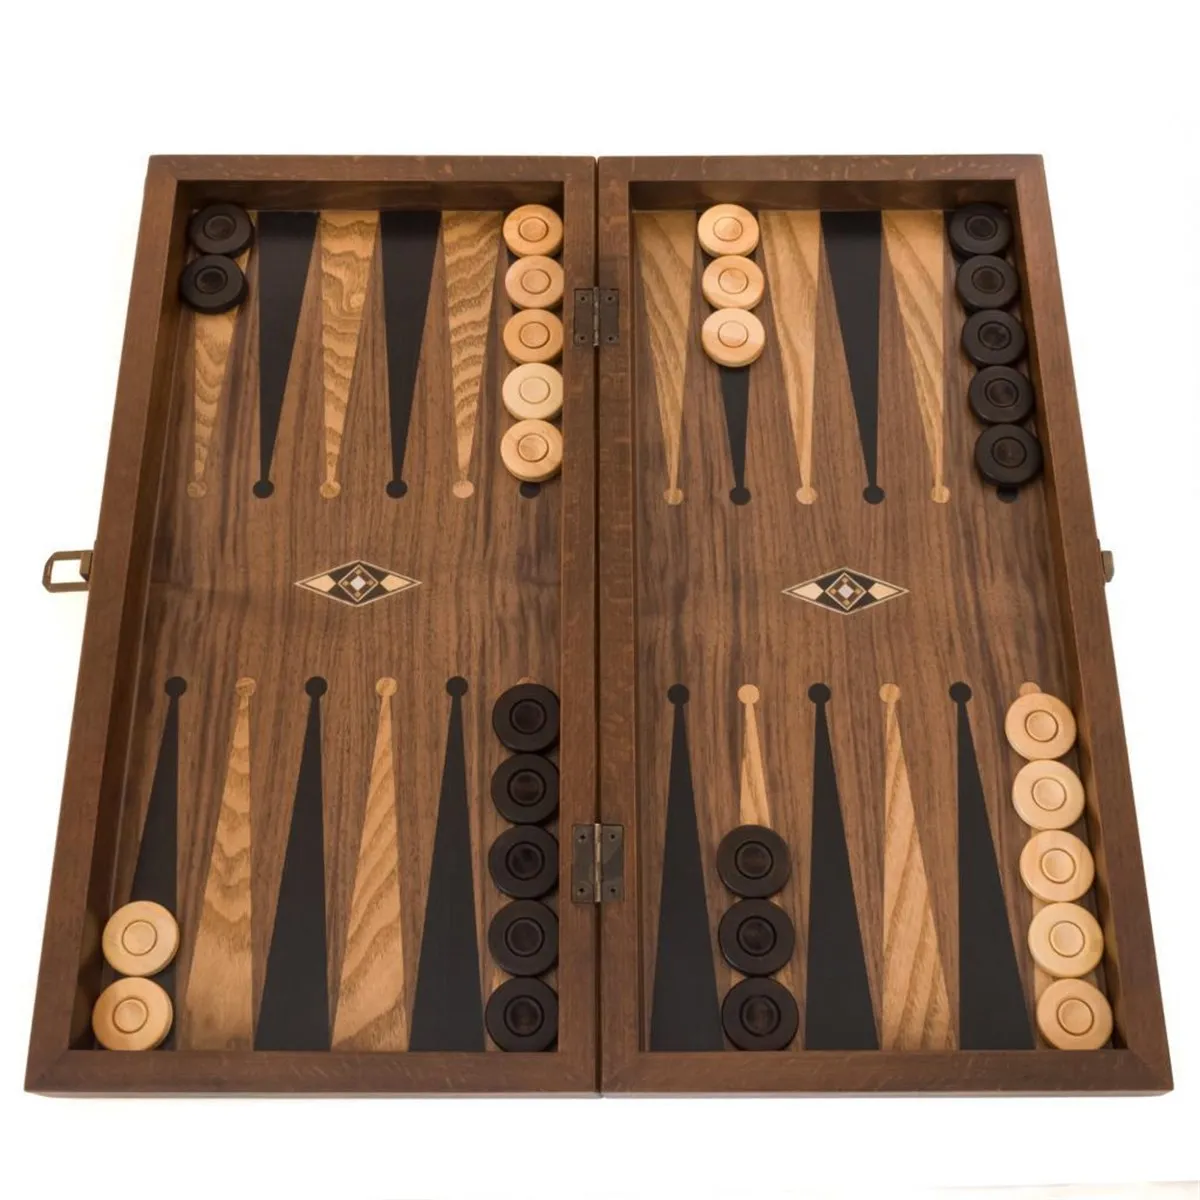 Luxury Big Size Natural Walnut Wood Coated Backgammon Board Game Set - With Chips Dice - With Boxwood Stamps Checkers Stones eko backgammon board game set large size natural walnut veneer with boxwood chips solid wood embroidered tiles checkers